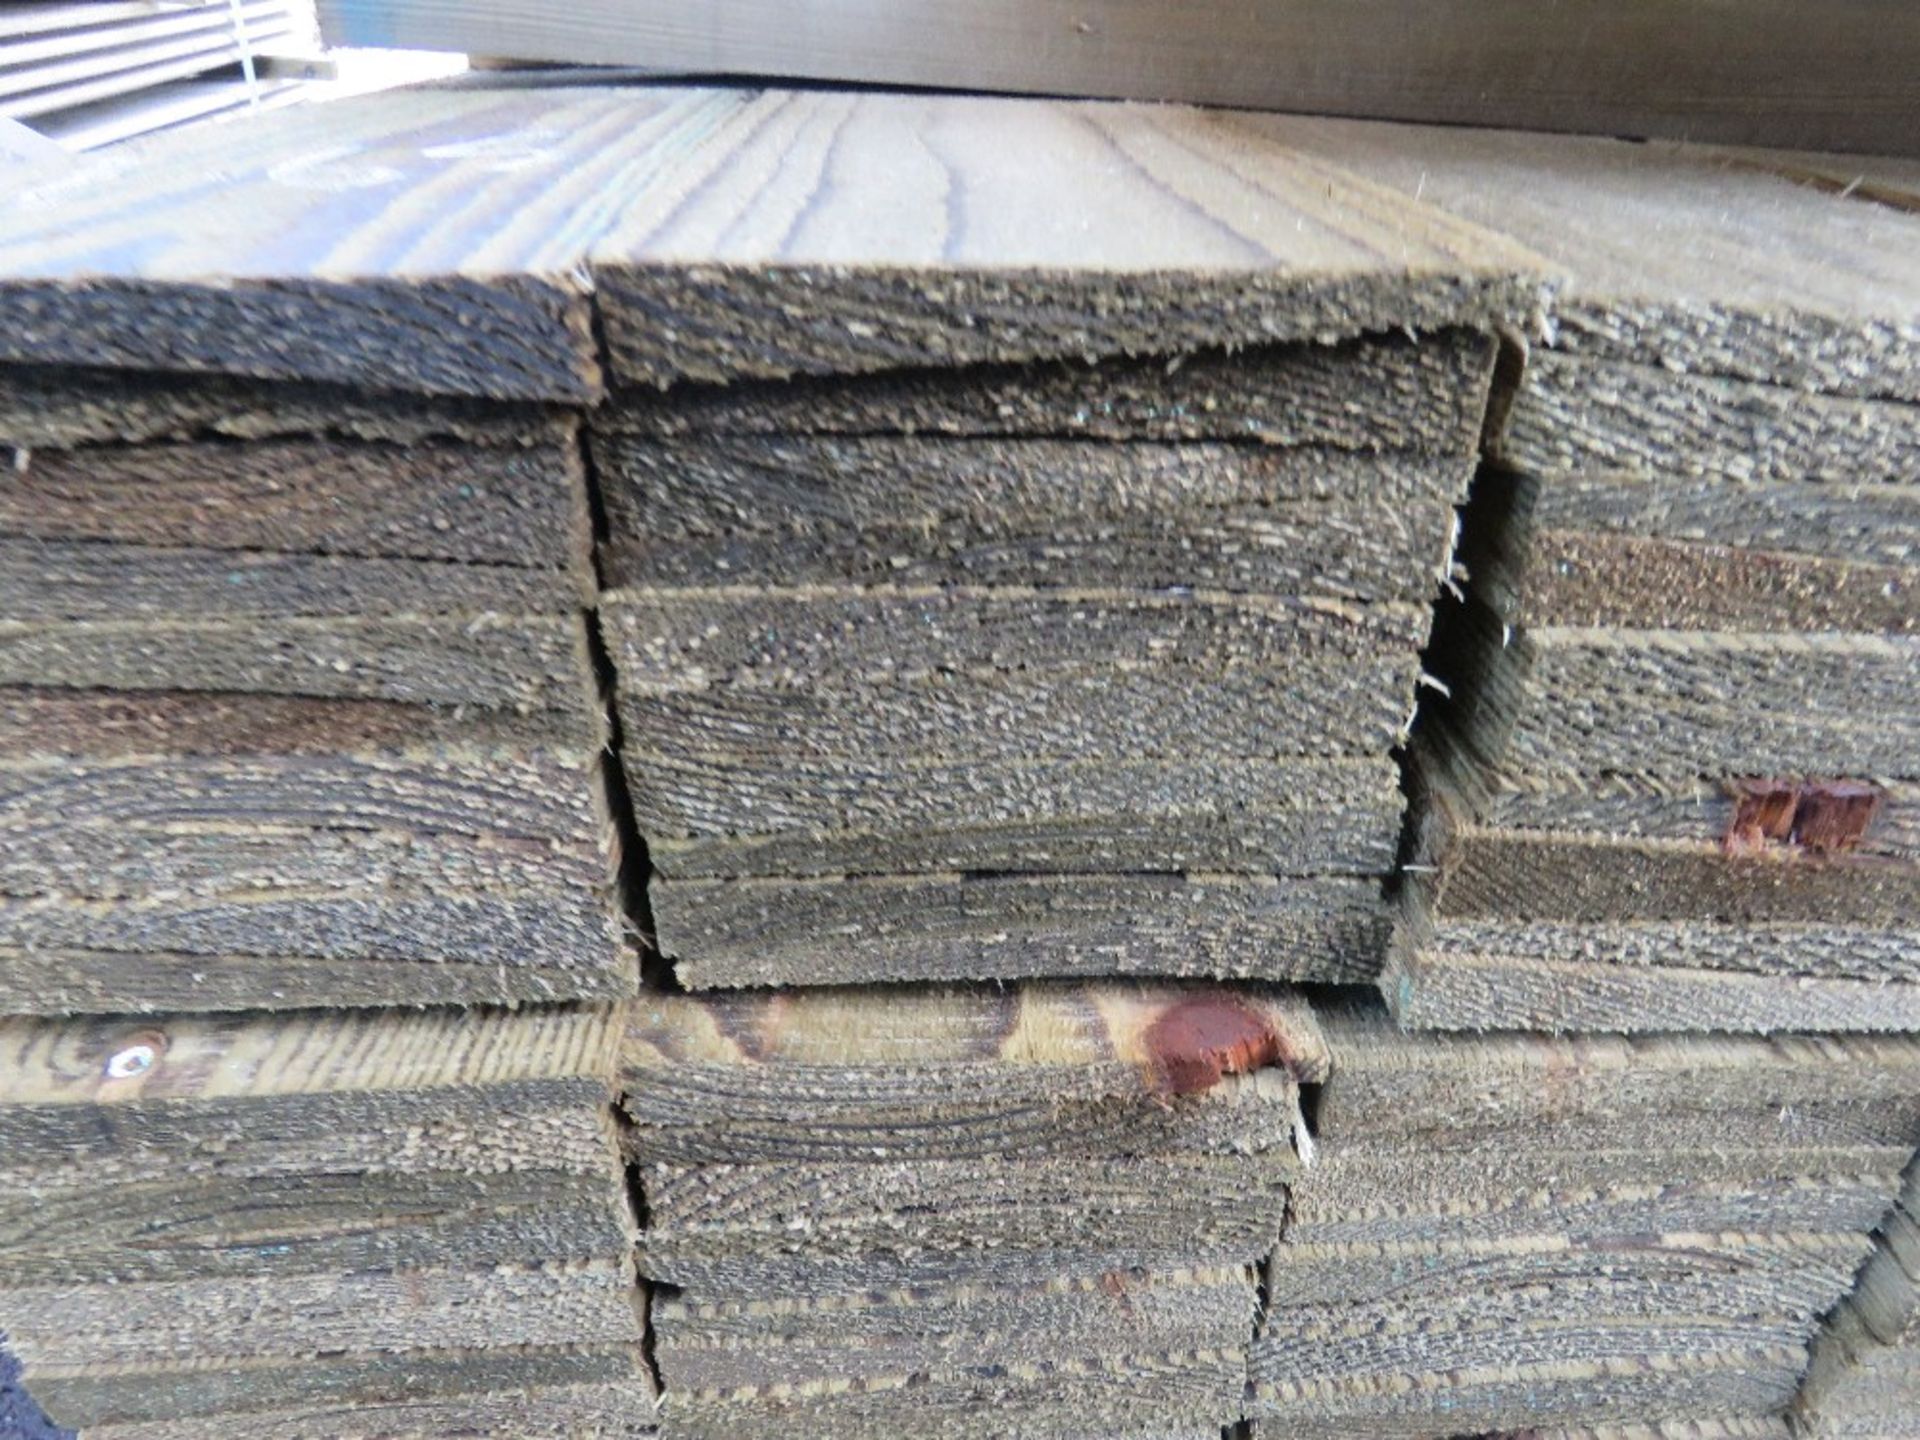 LARGE BUNDLE OF PRESSURE TREATED FEATHER EDGE TIMBER CLADDING: 1.65M LENGTH X 10CM WIDTH APPROX. - Image 3 of 3